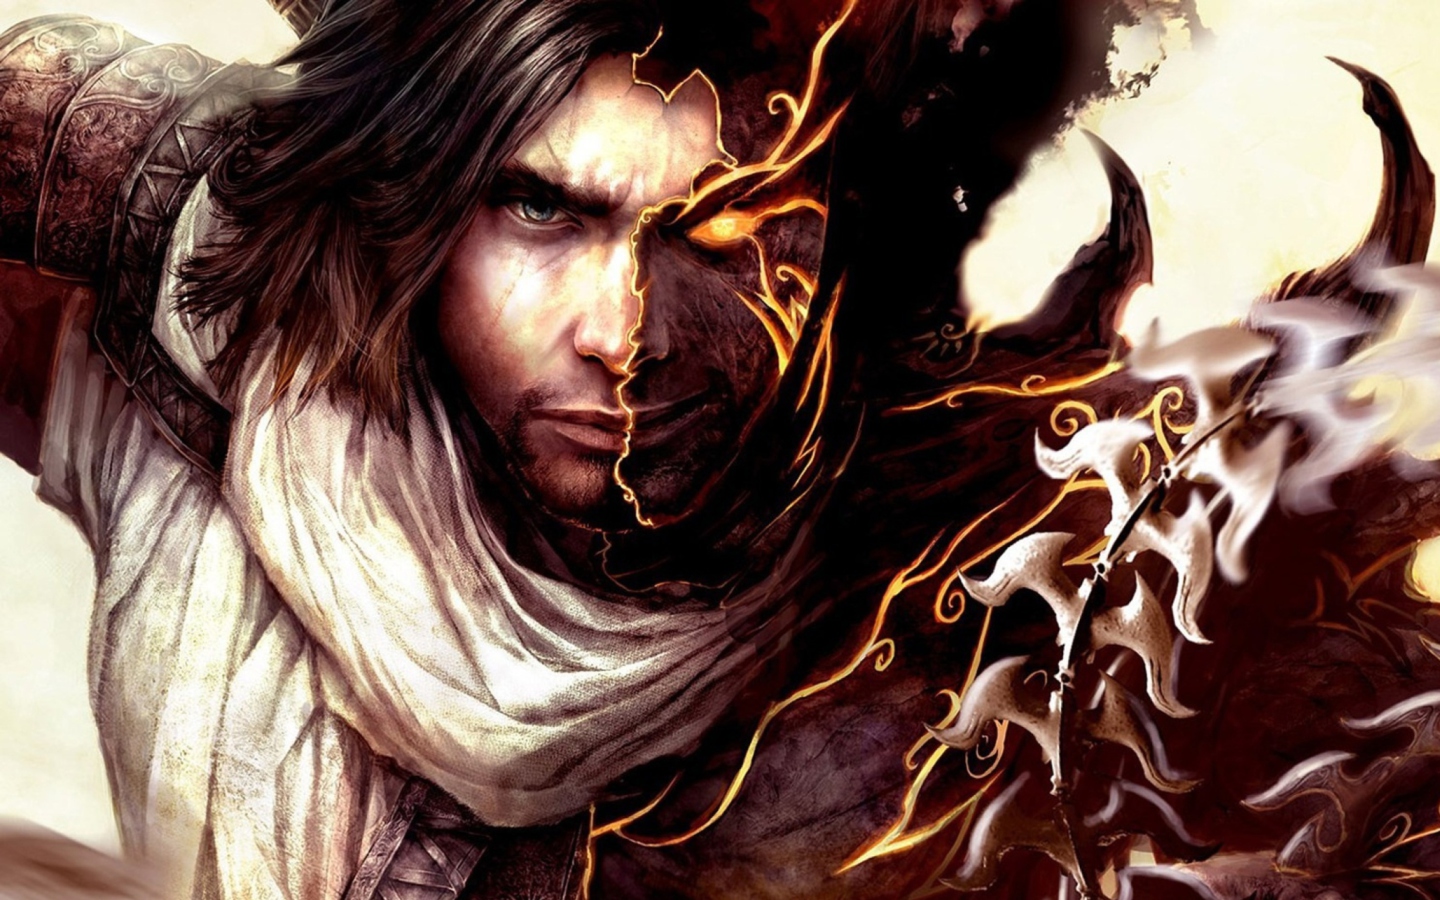 Prince Of Persia - The Two Thrones screenshot #1 1440x900